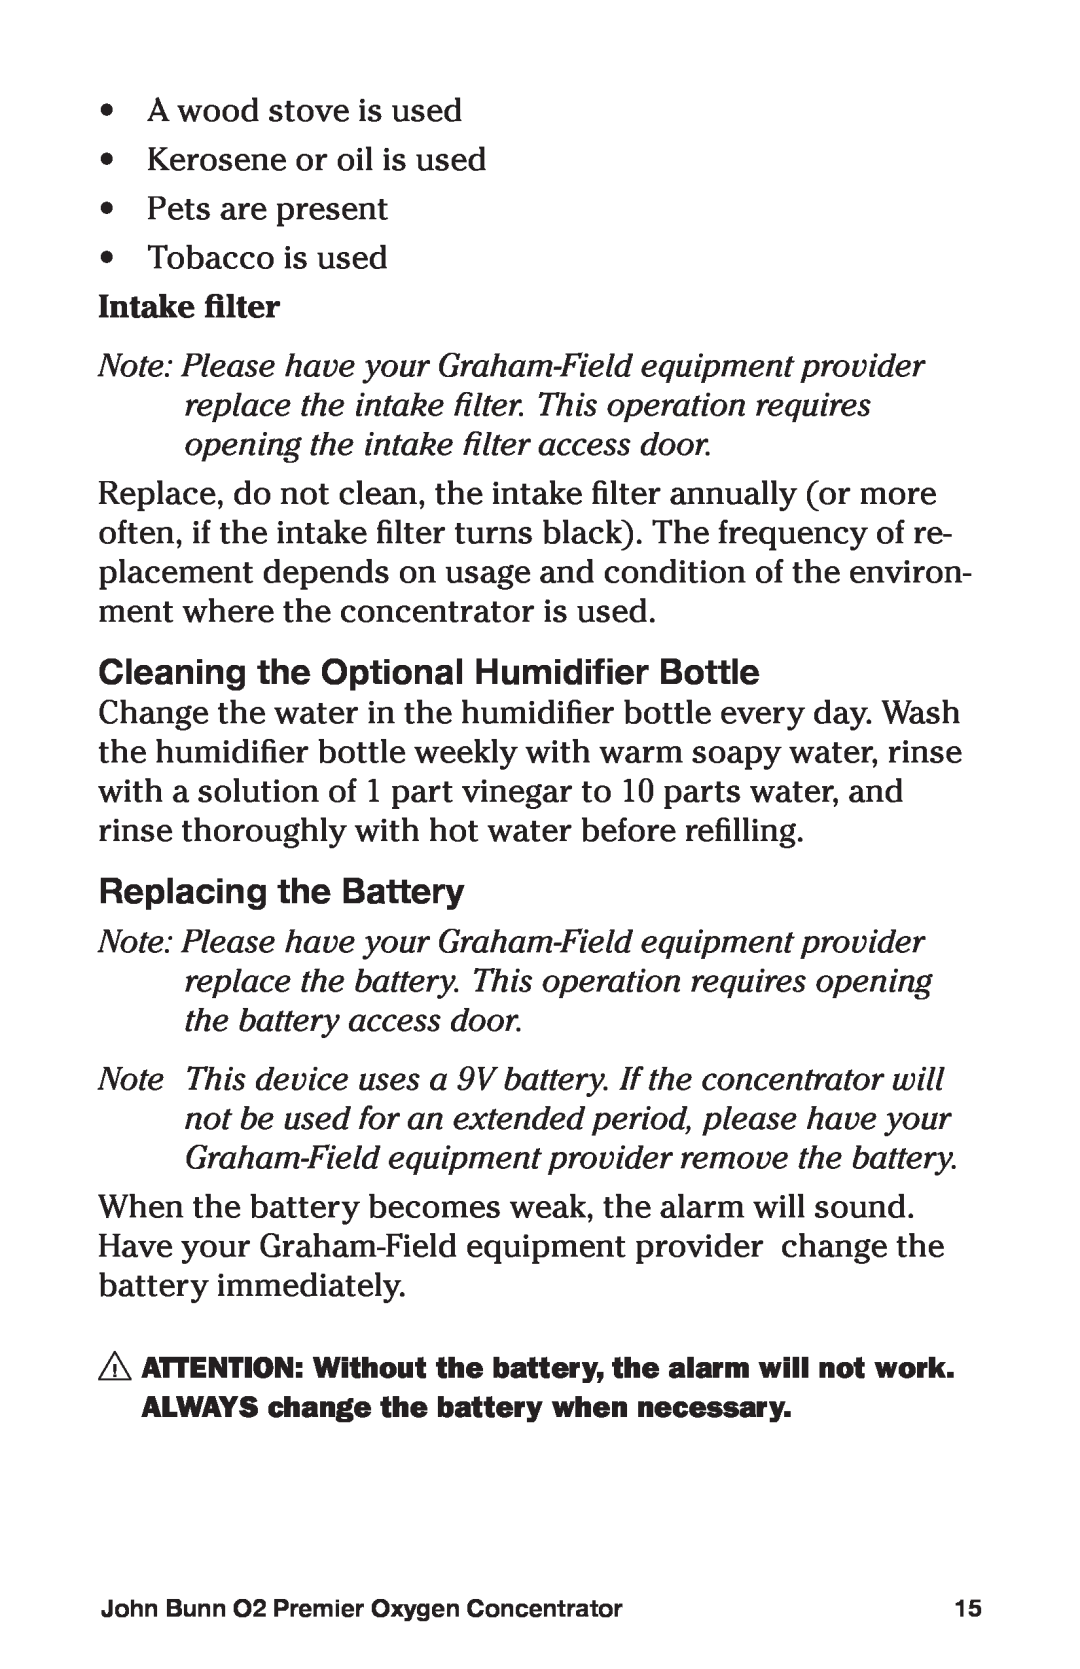 Graham Field JB0160-010B-220, JB0160-015 Cleaning the Optional Humidifier Bottle, Replacing the Battery, Intake filter 